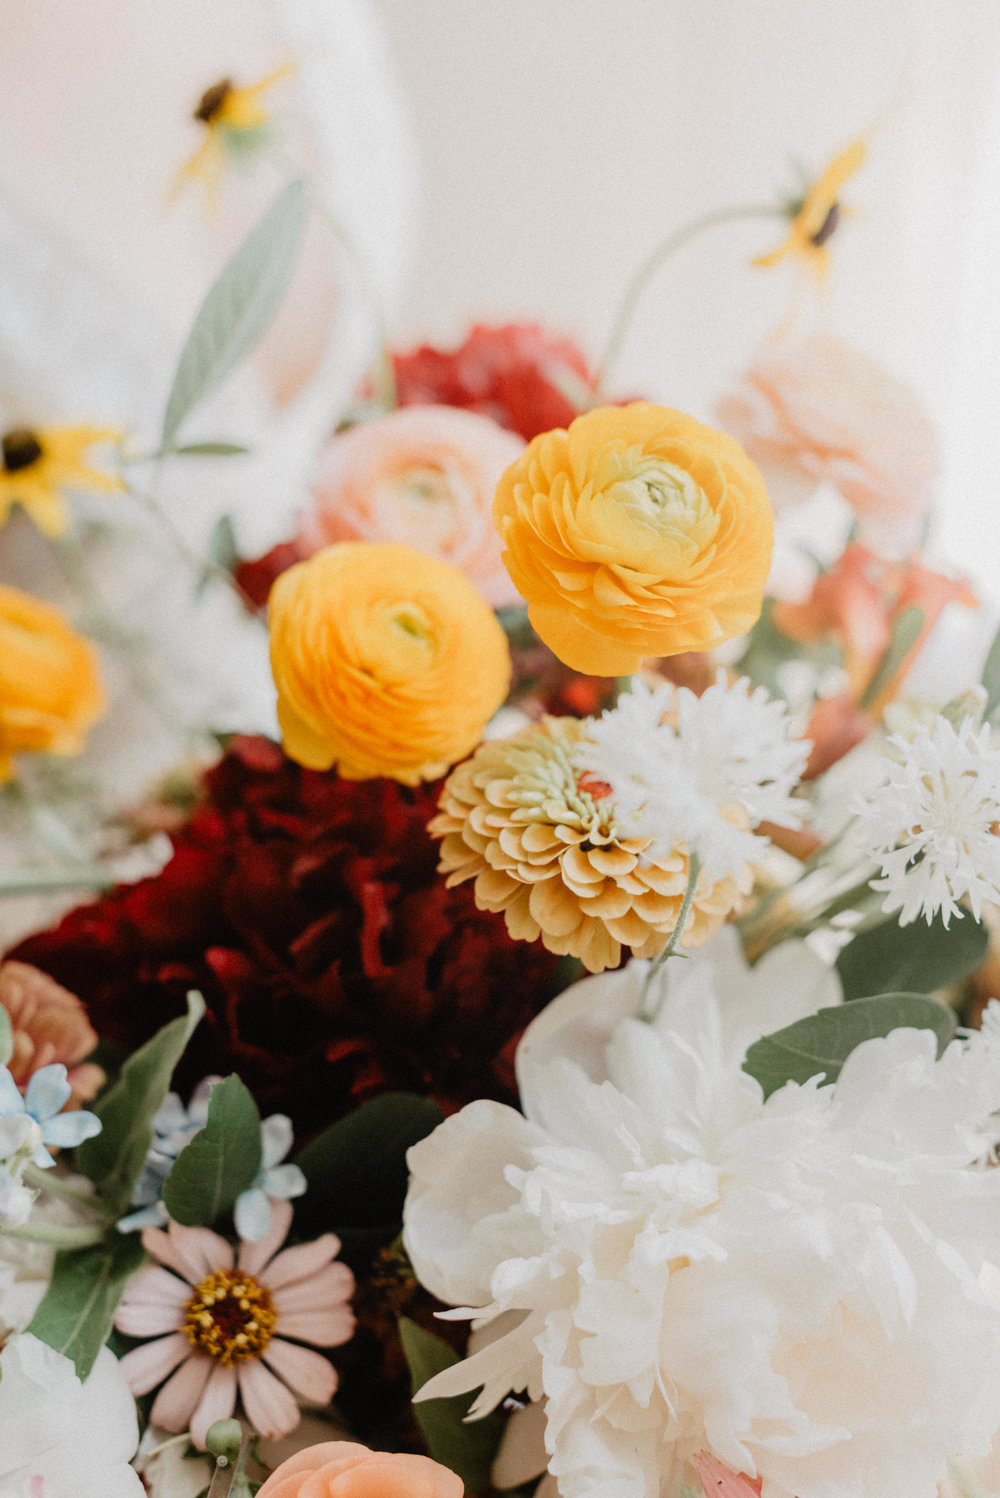 Clever Girl Florals - Meadowlark Photography